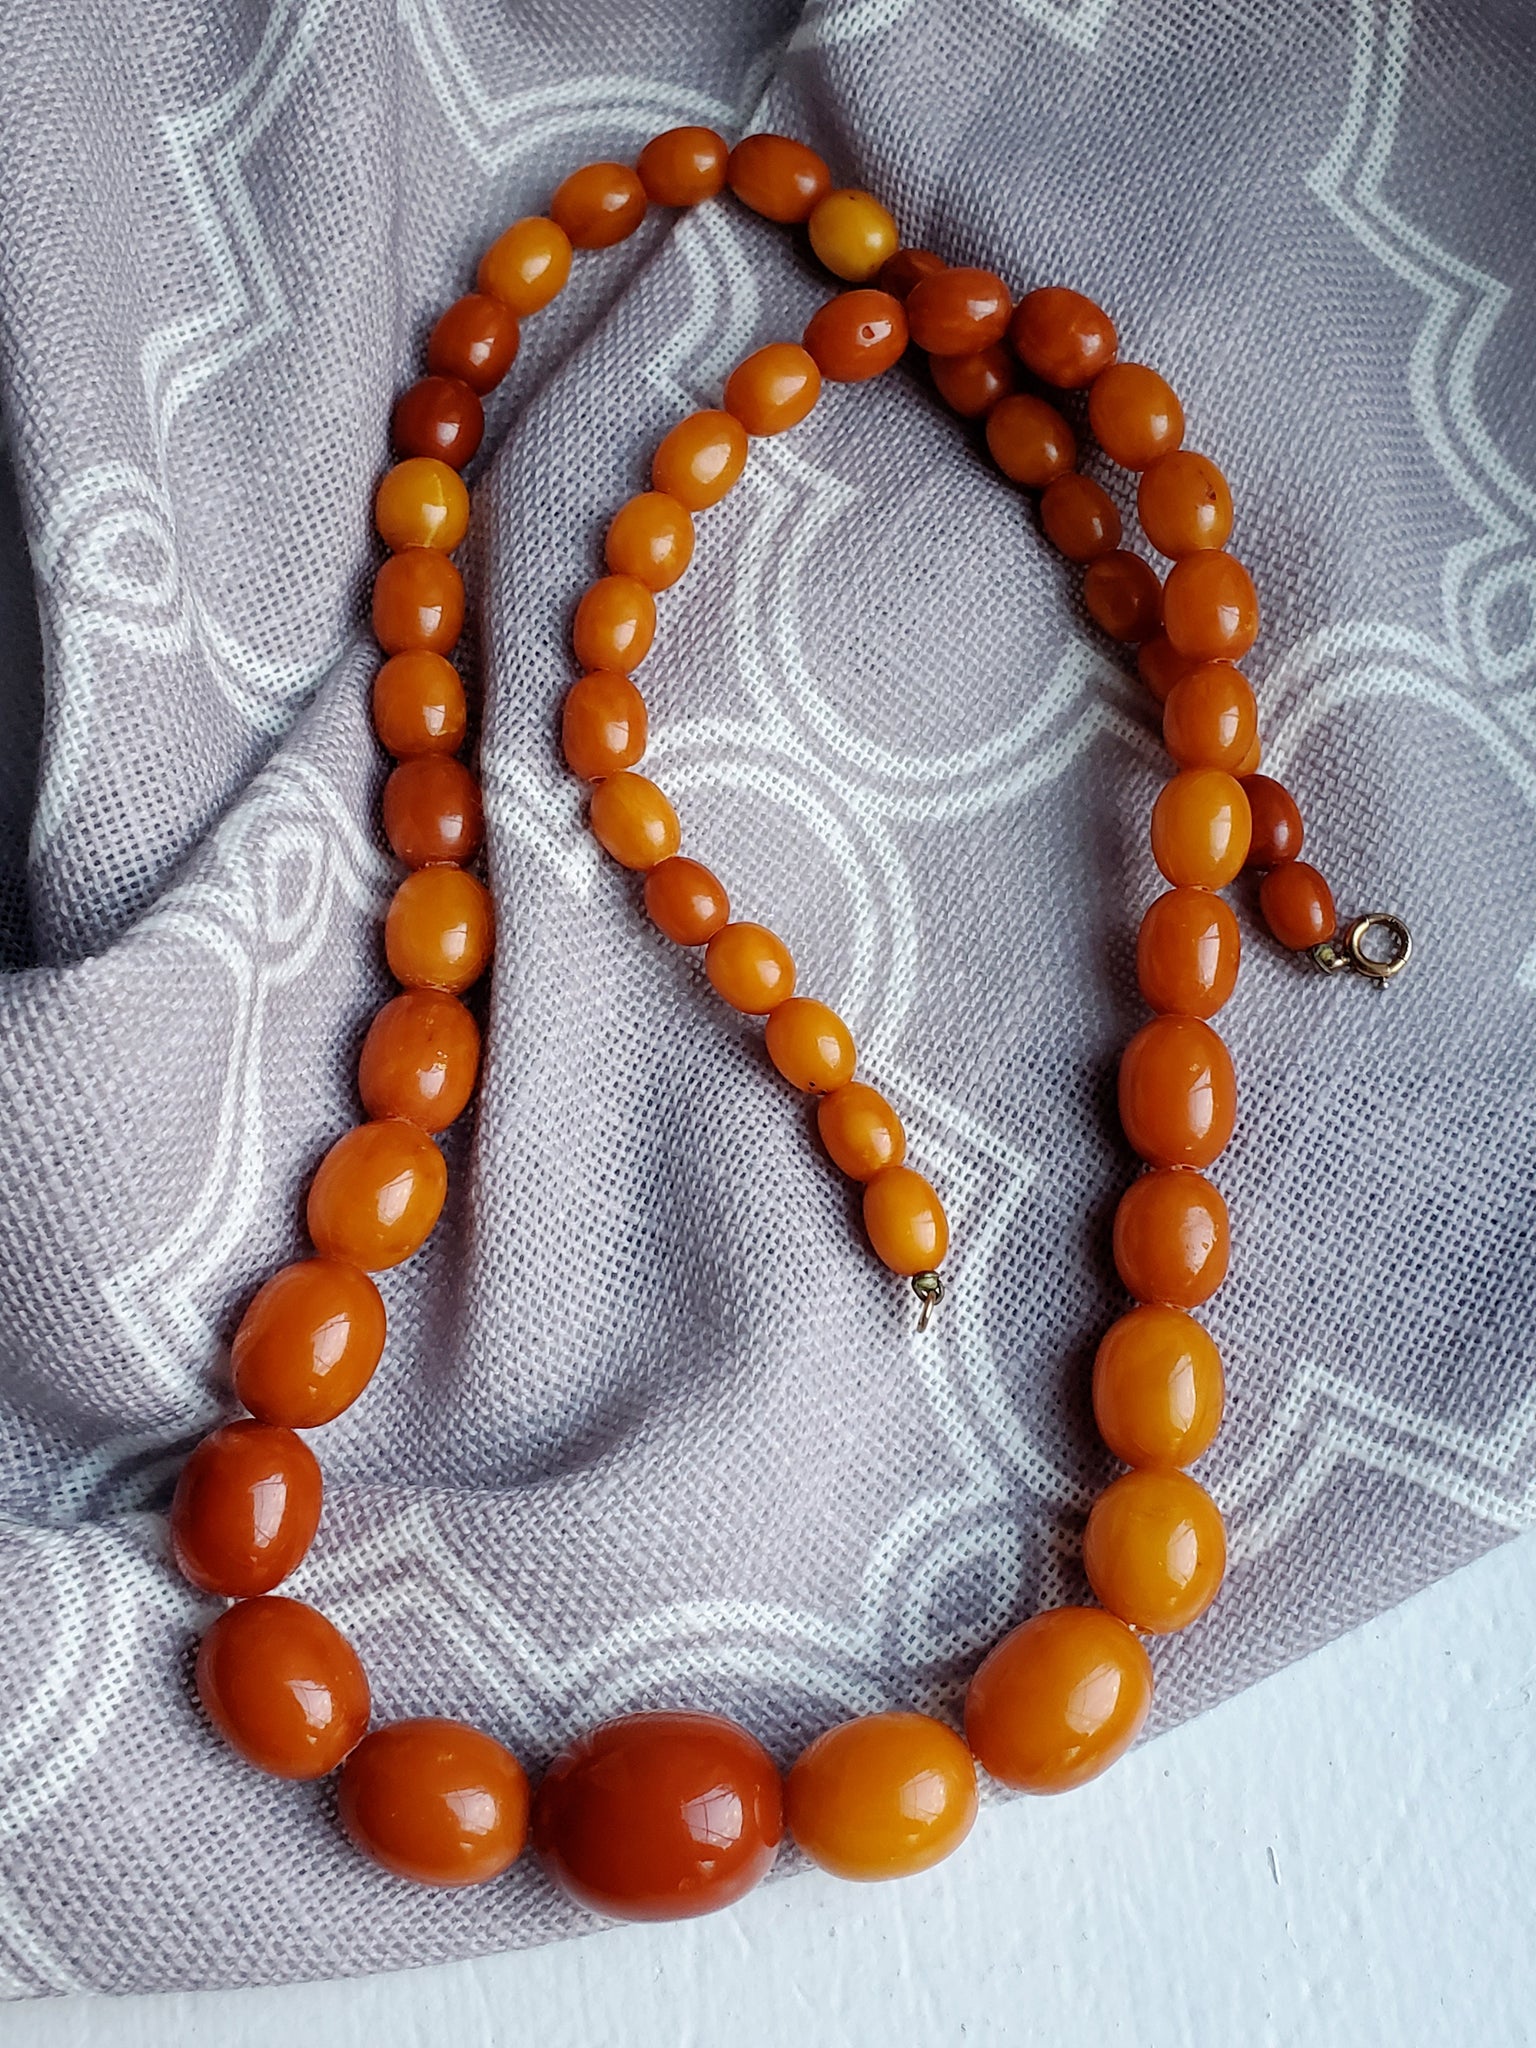 Harvest Amber Necklace by Inspired by Finn | cribhawaii.com